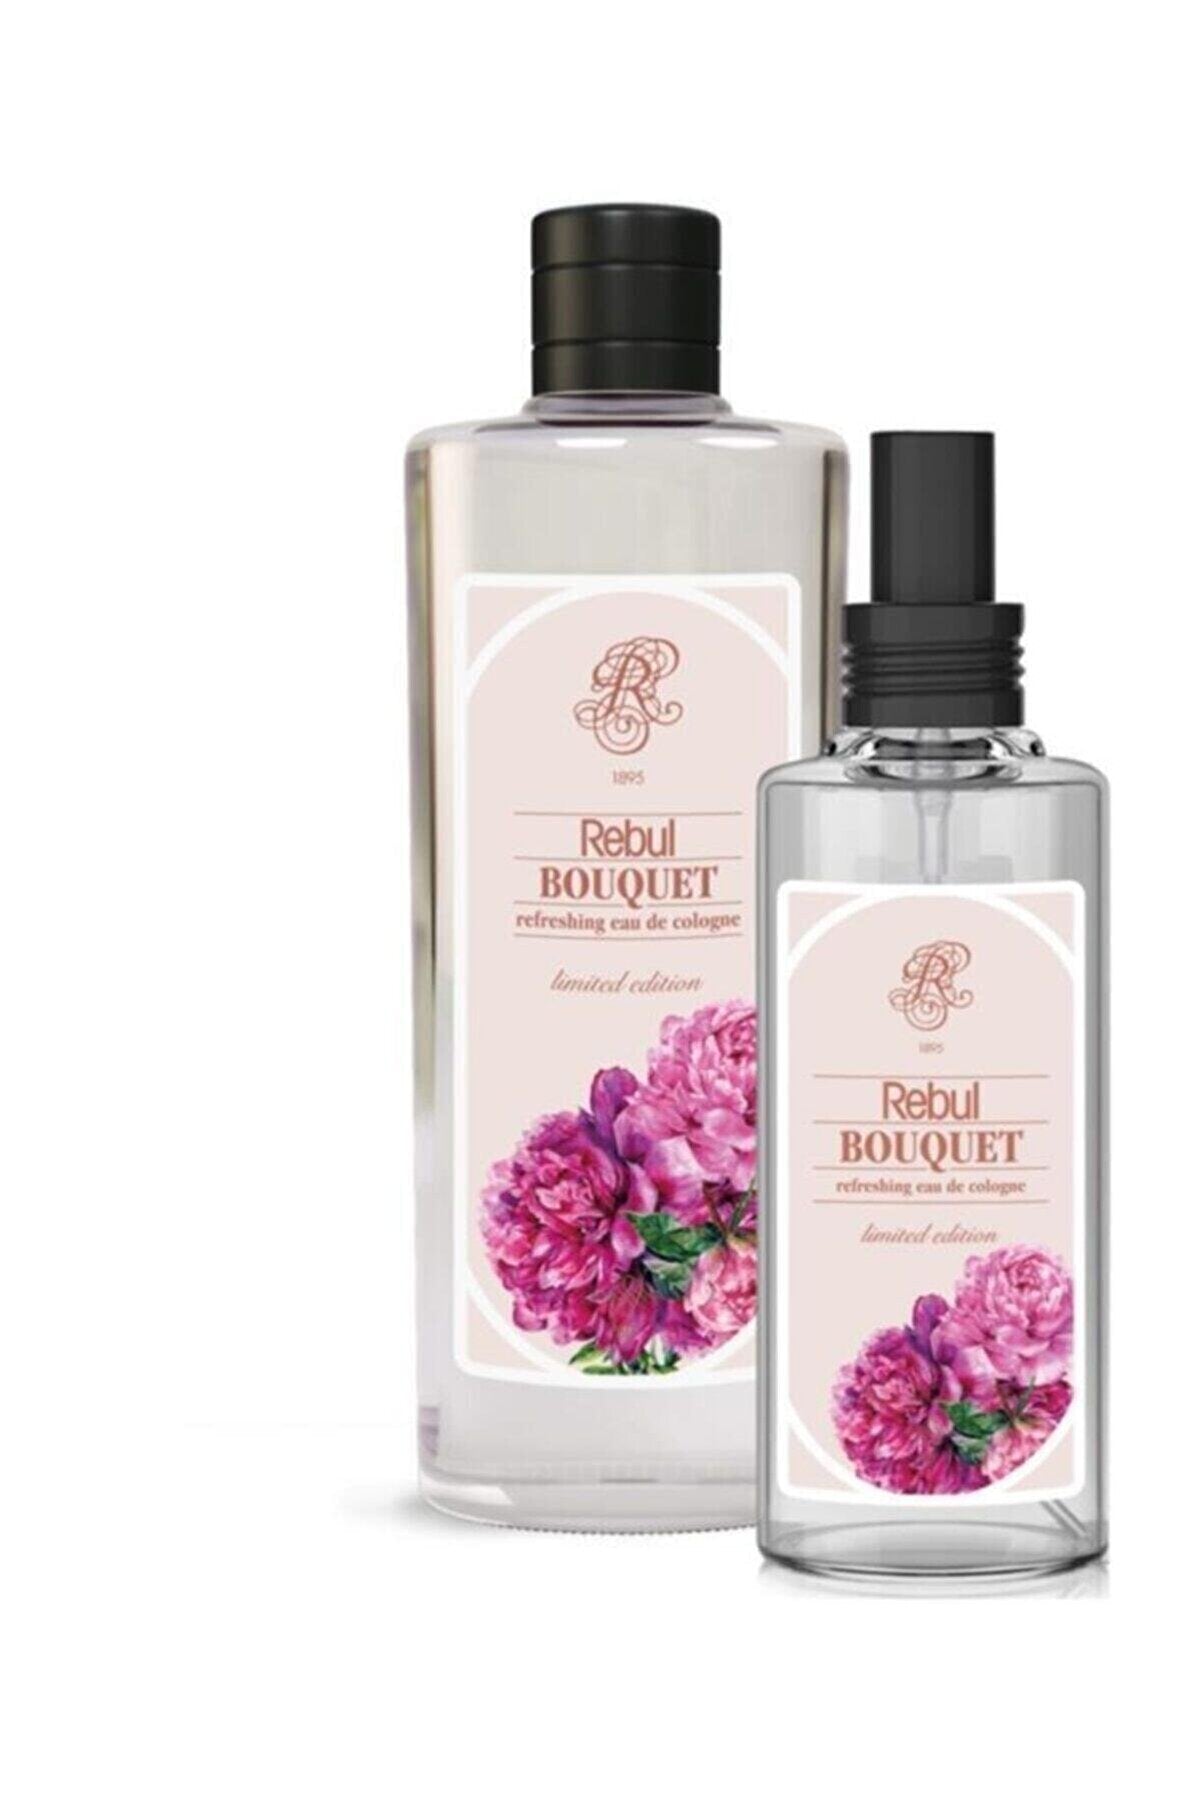 Rebul Bouquet 270 Ml And 100 Ml Cologne